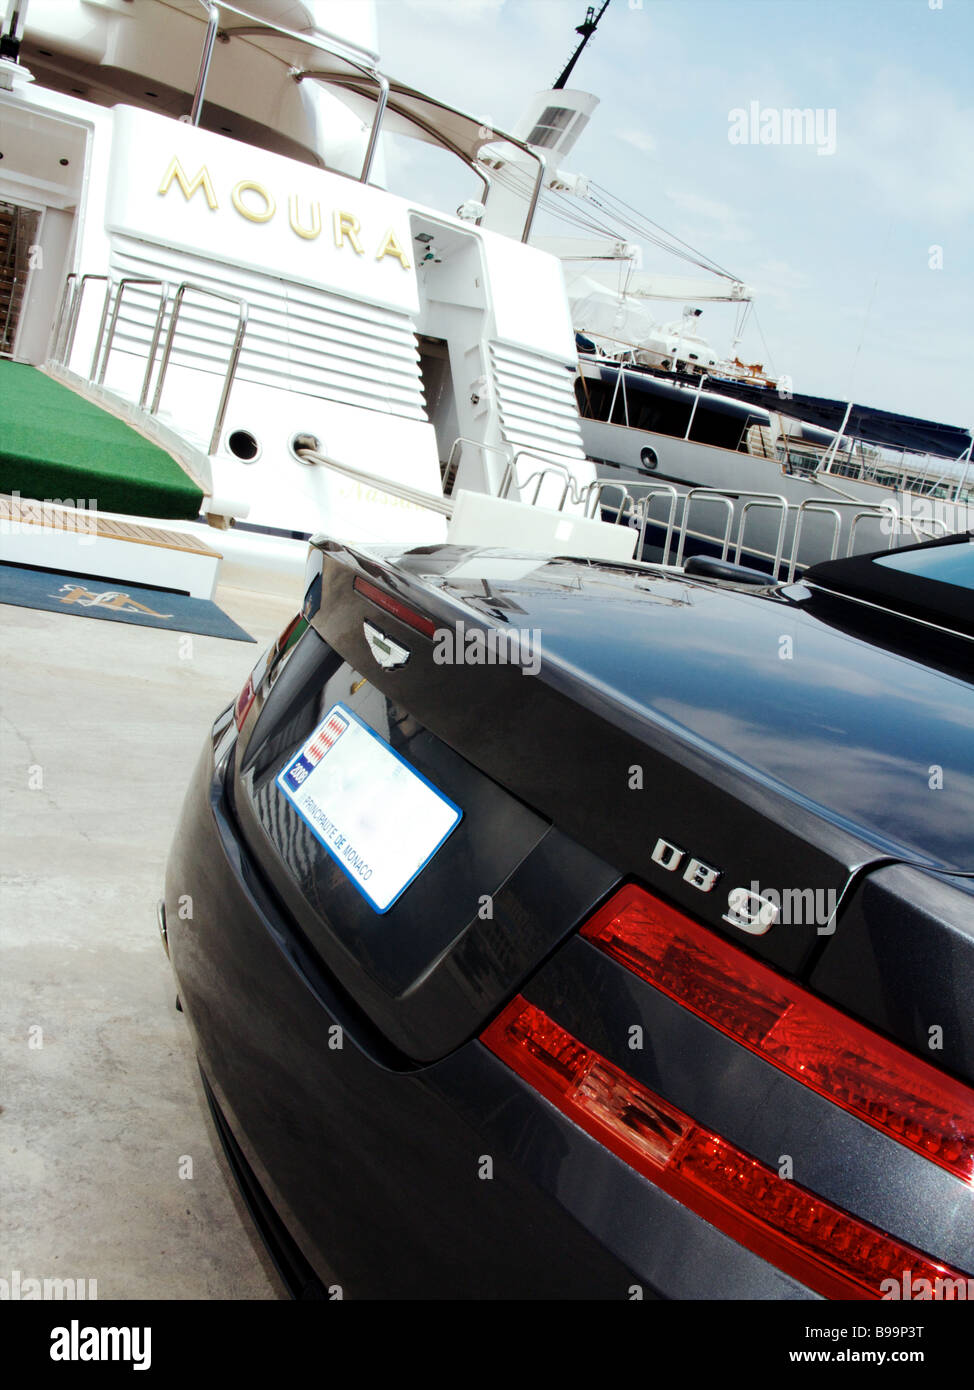 A blue Aston Martin DB9 parked alongside the Lady Moura luxury super yacht moored in the port of Monaco Monte Carlo Stock Photo